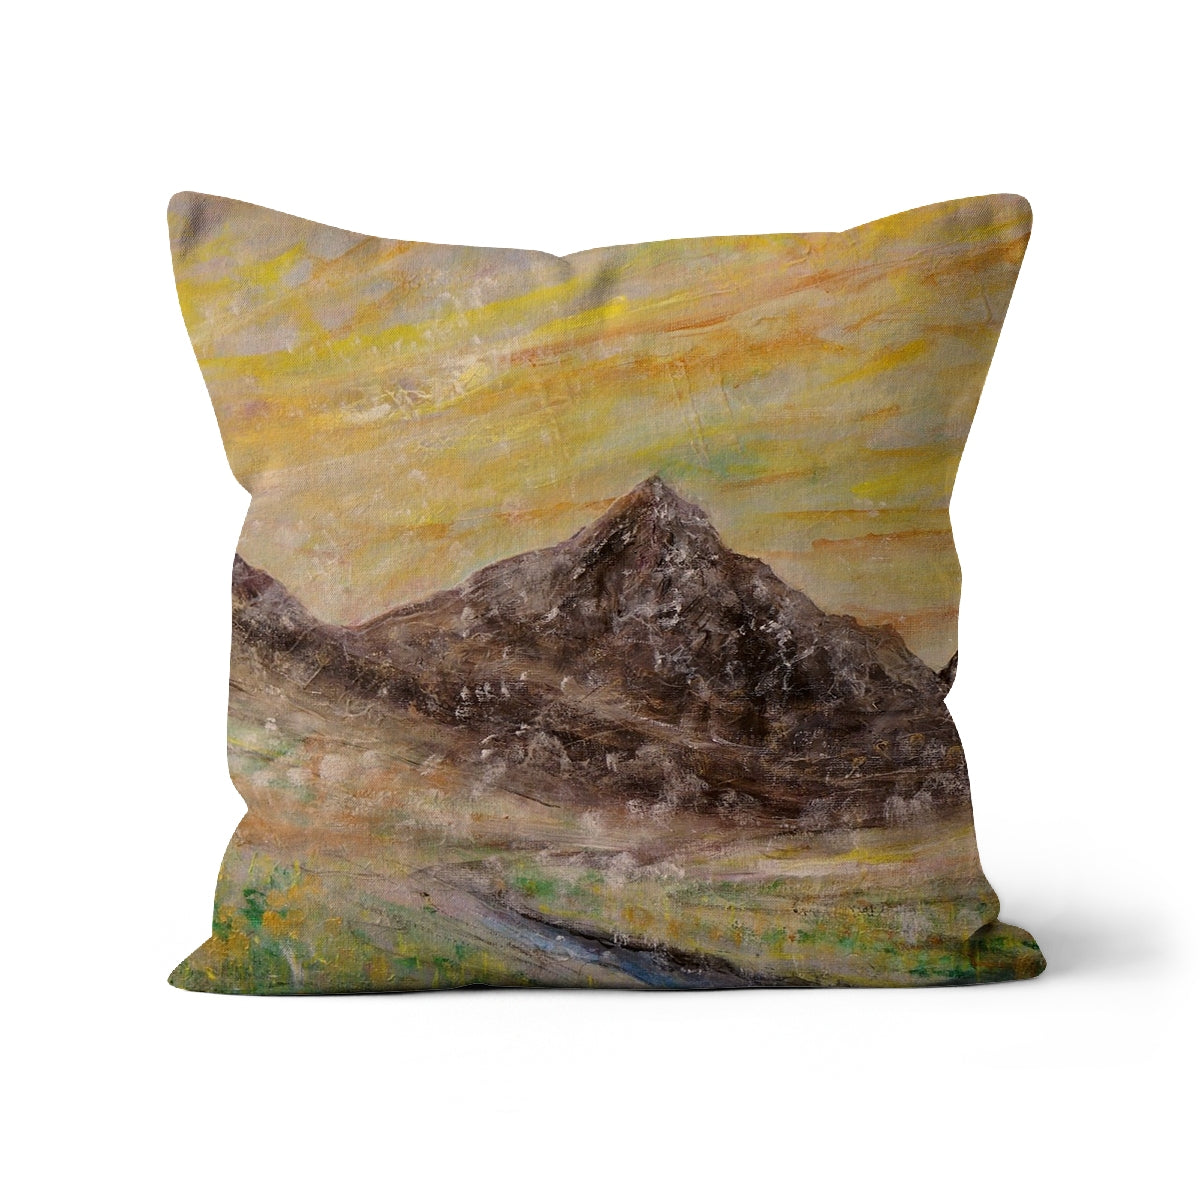 Glen Rosa Mist Arran Art Gifts Cushion-Cushions-Arran Art Gallery-Faux Suede-12"x12"-Paintings, Prints, Homeware, Art Gifts From Scotland By Scottish Artist Kevin Hunter